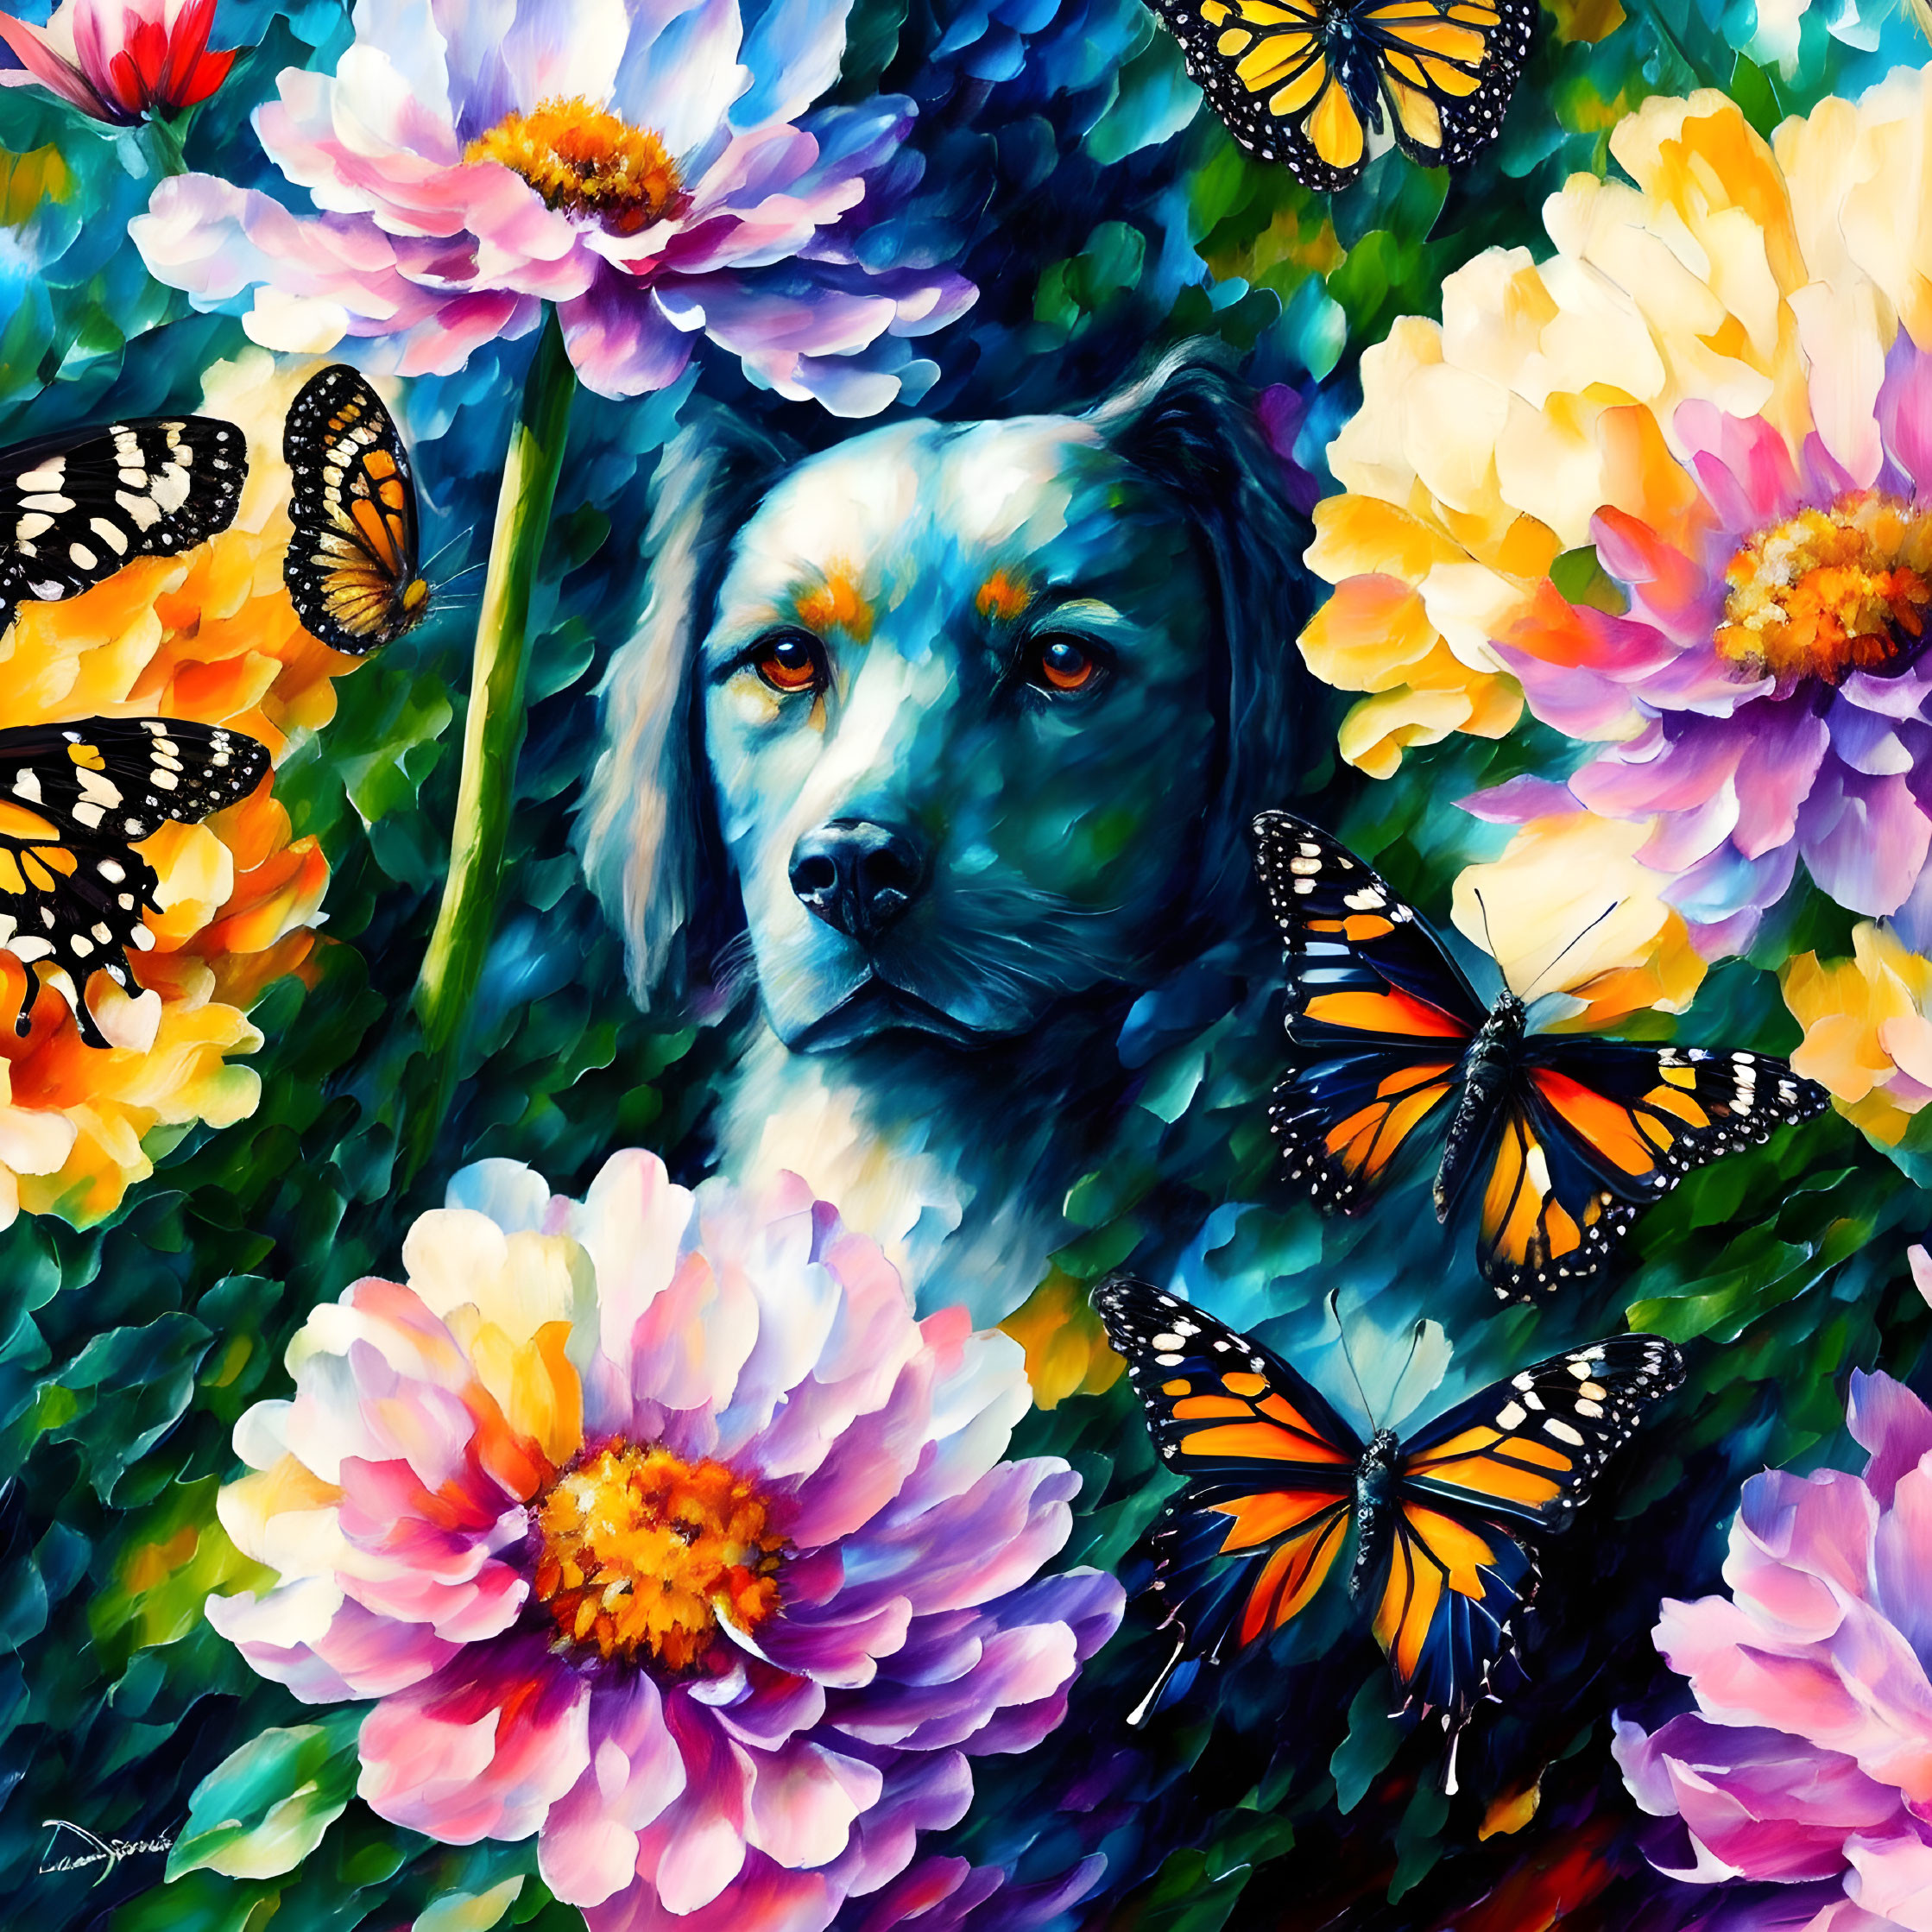 Dogs and butterflies